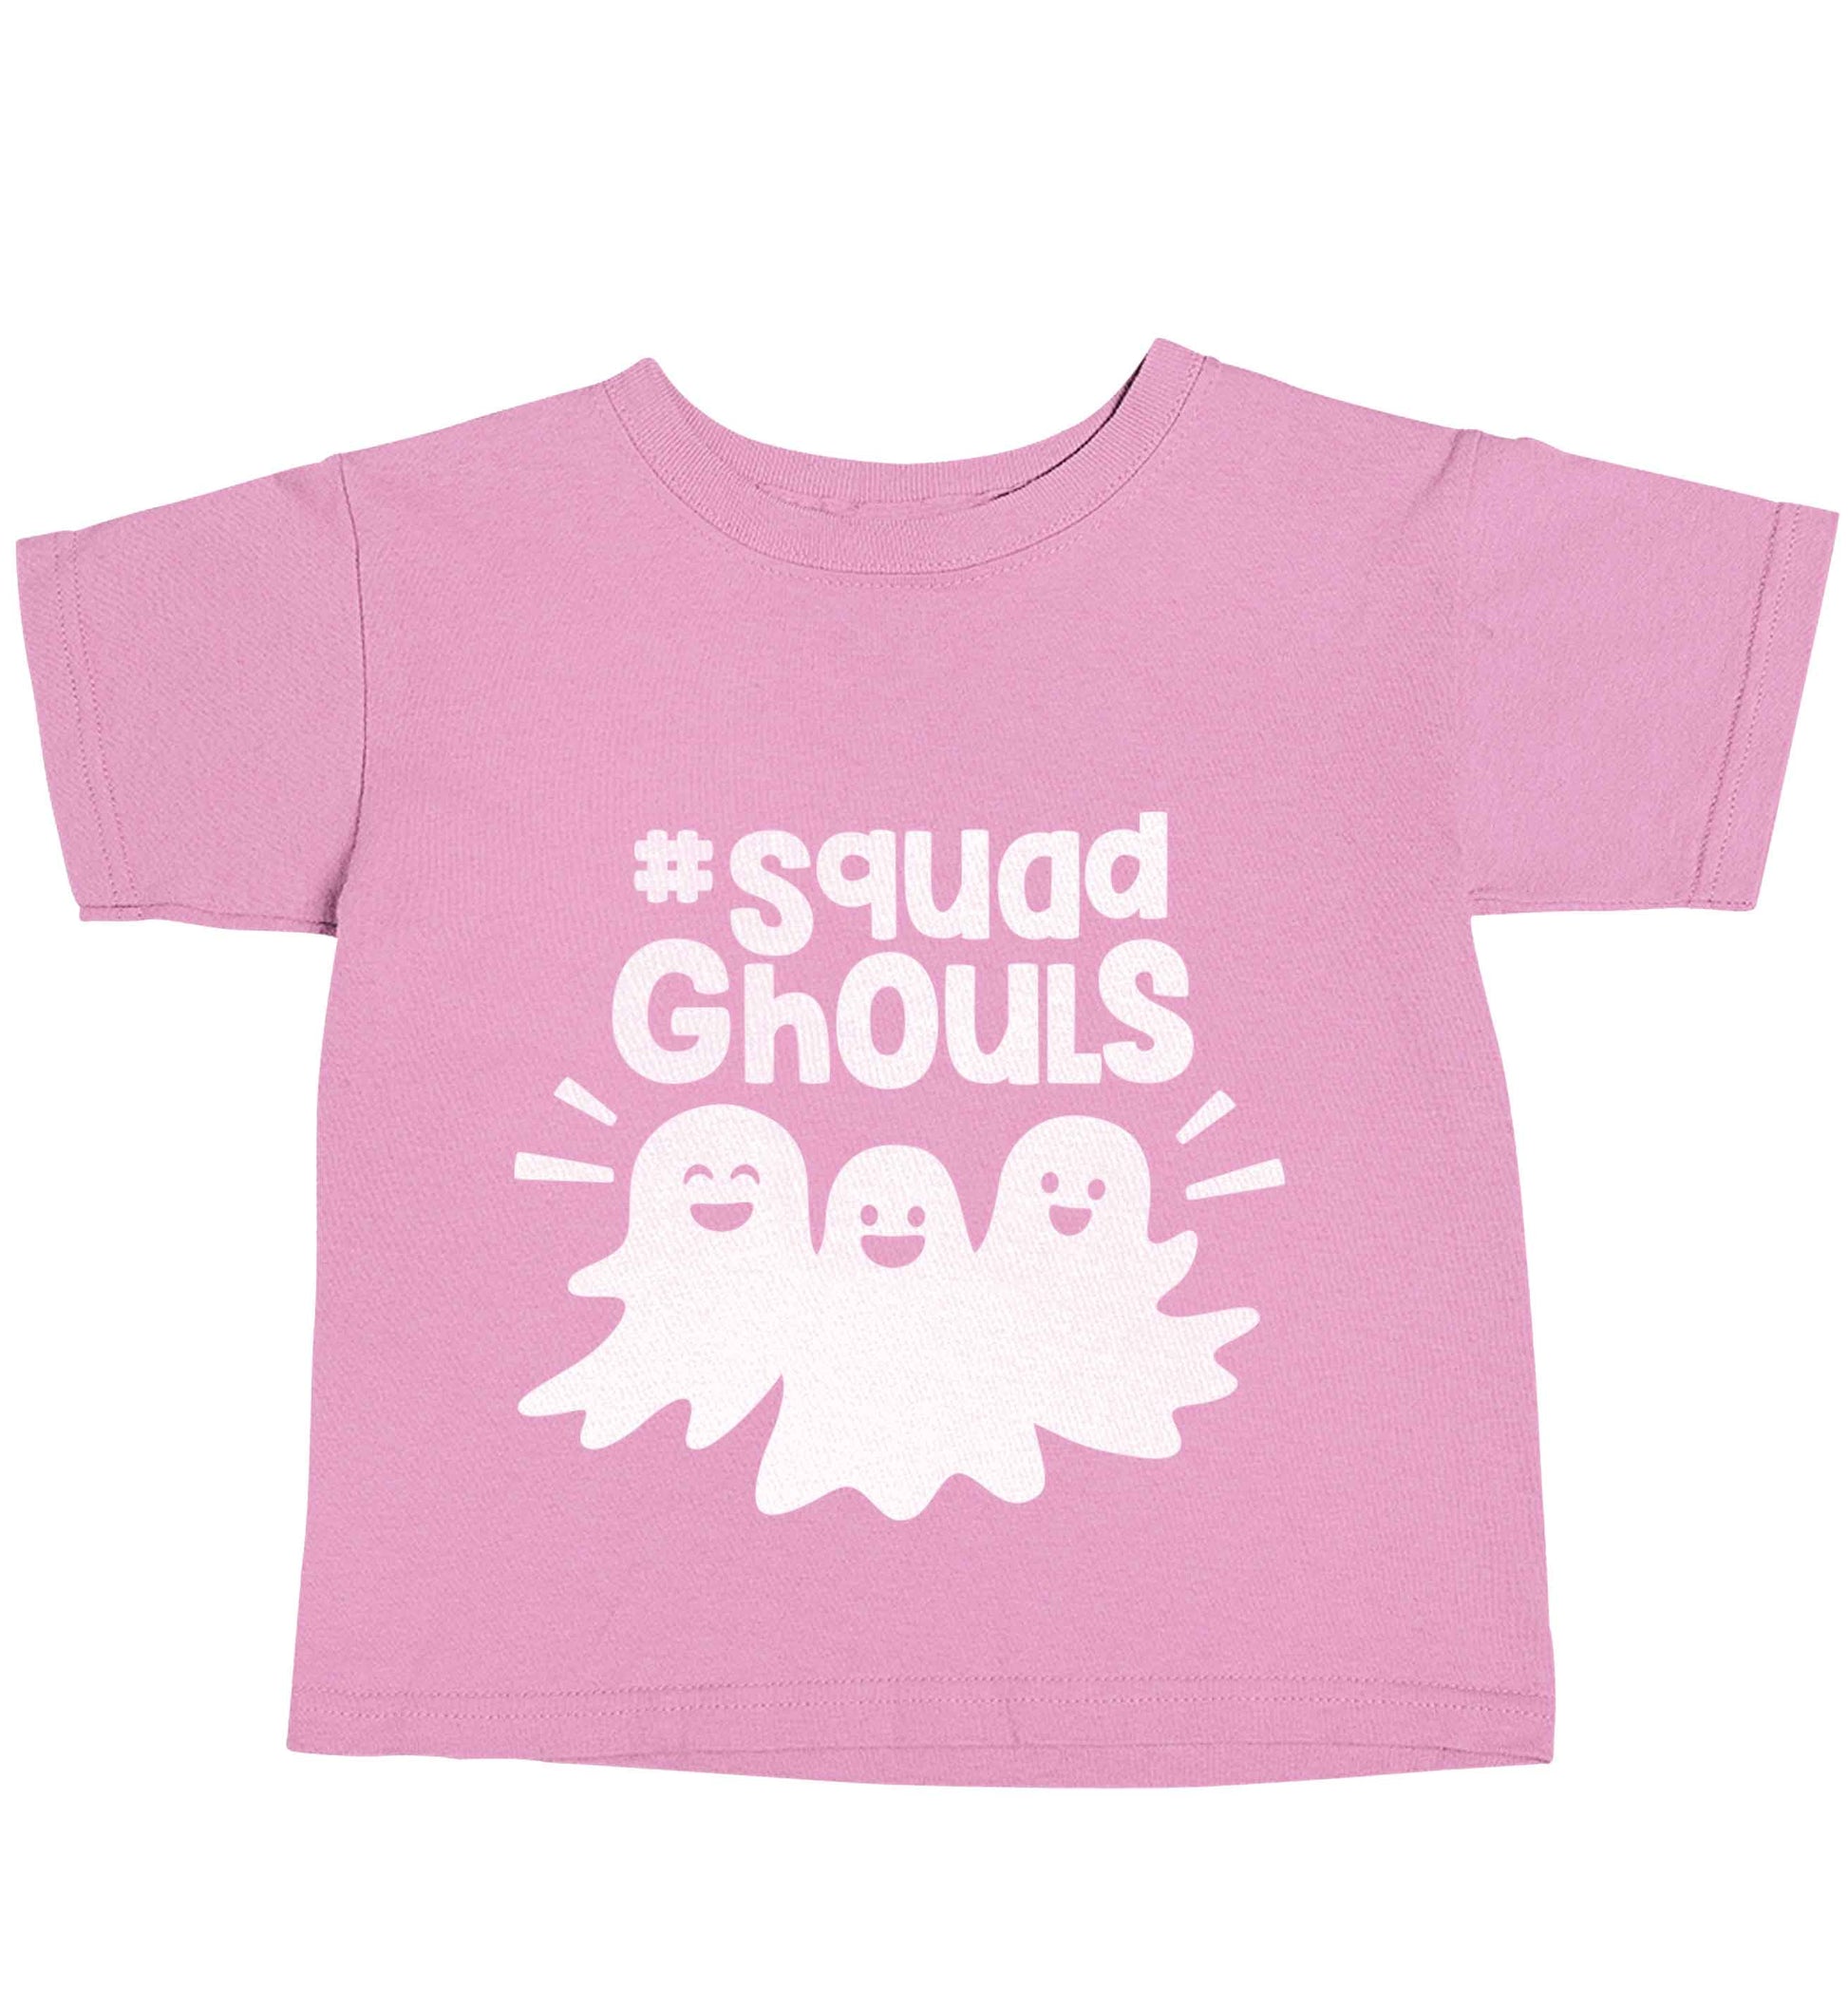 Squad ghouls Kit light pink baby toddler Tshirt 2 Years